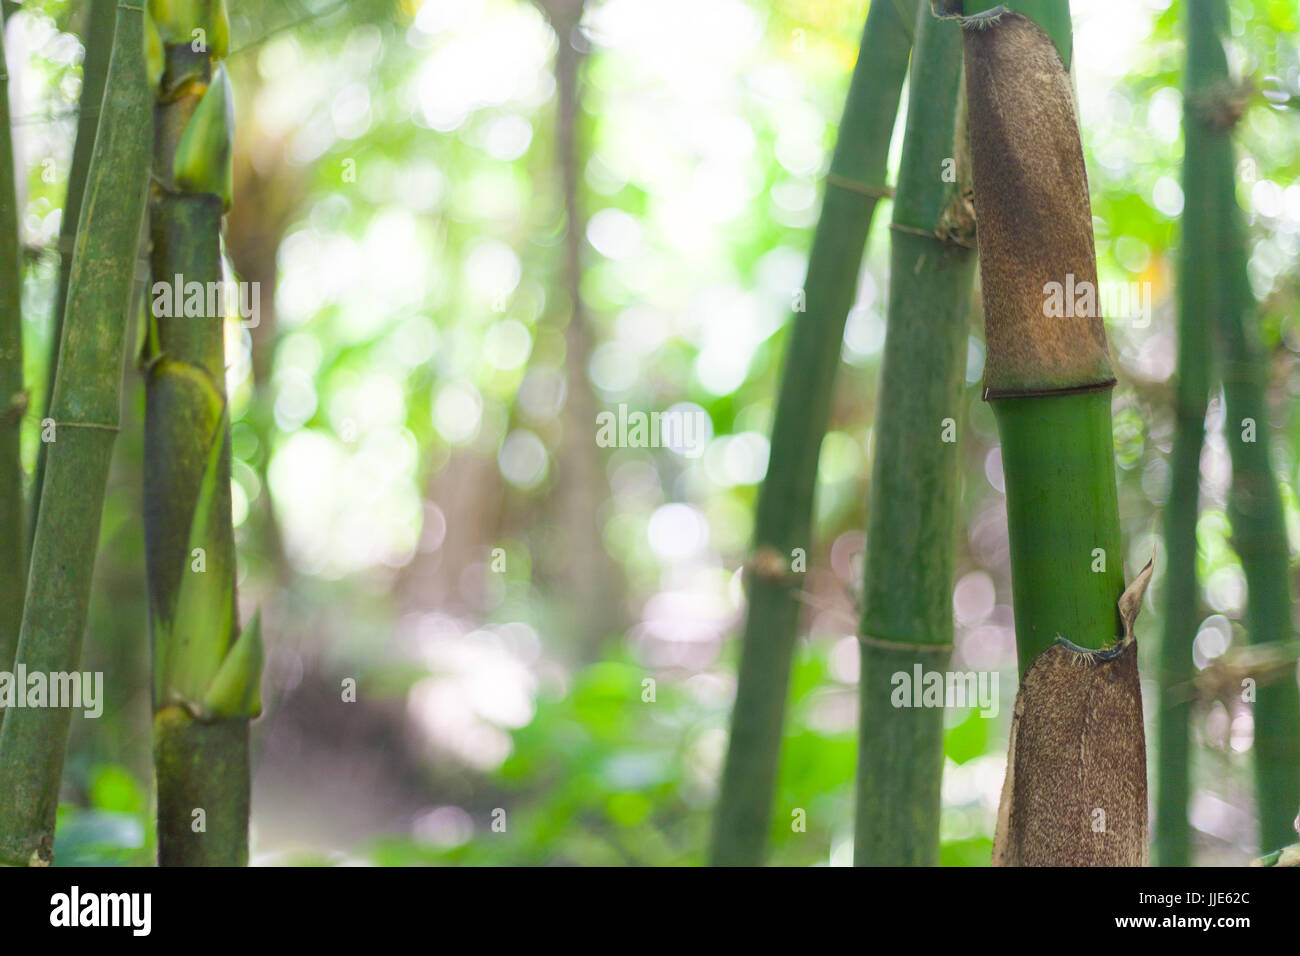 Detail of Bamboo and Bananas Plants in Vietnam Mekong Delta Village Stock Photo